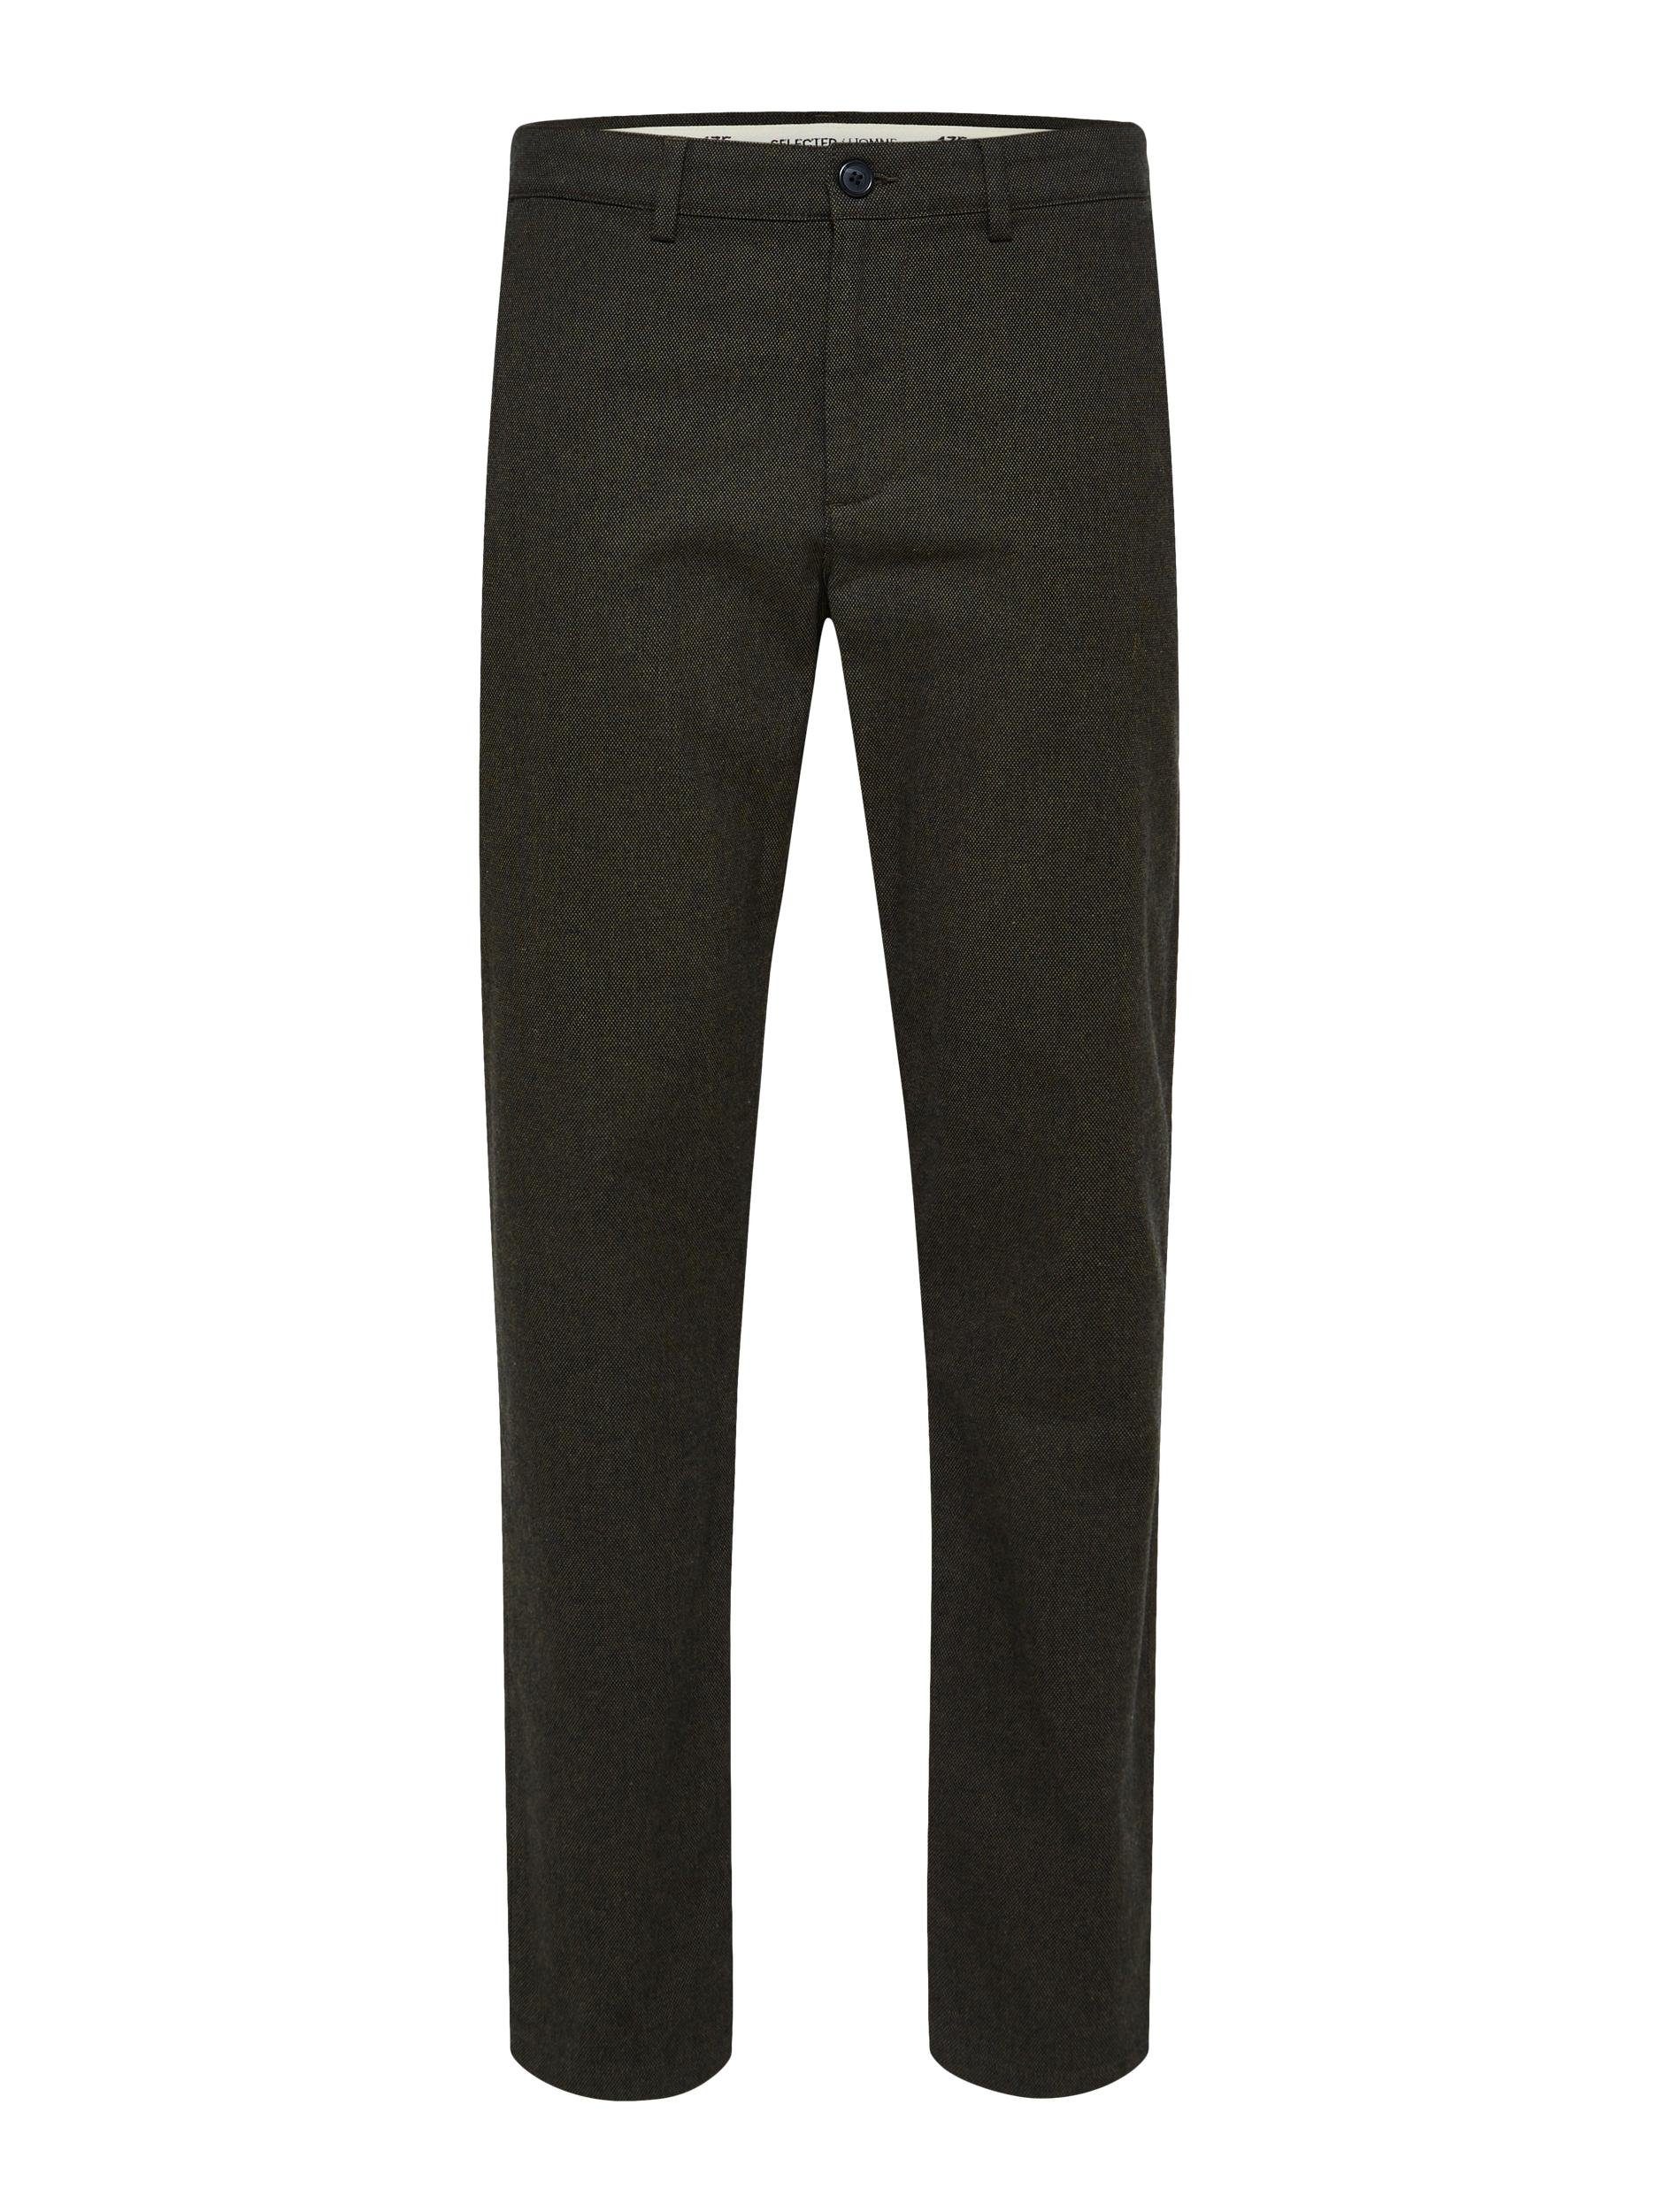 SELECTED HOMME Chinohose 175 SLIM FIT BRUSHED CHINO forest night